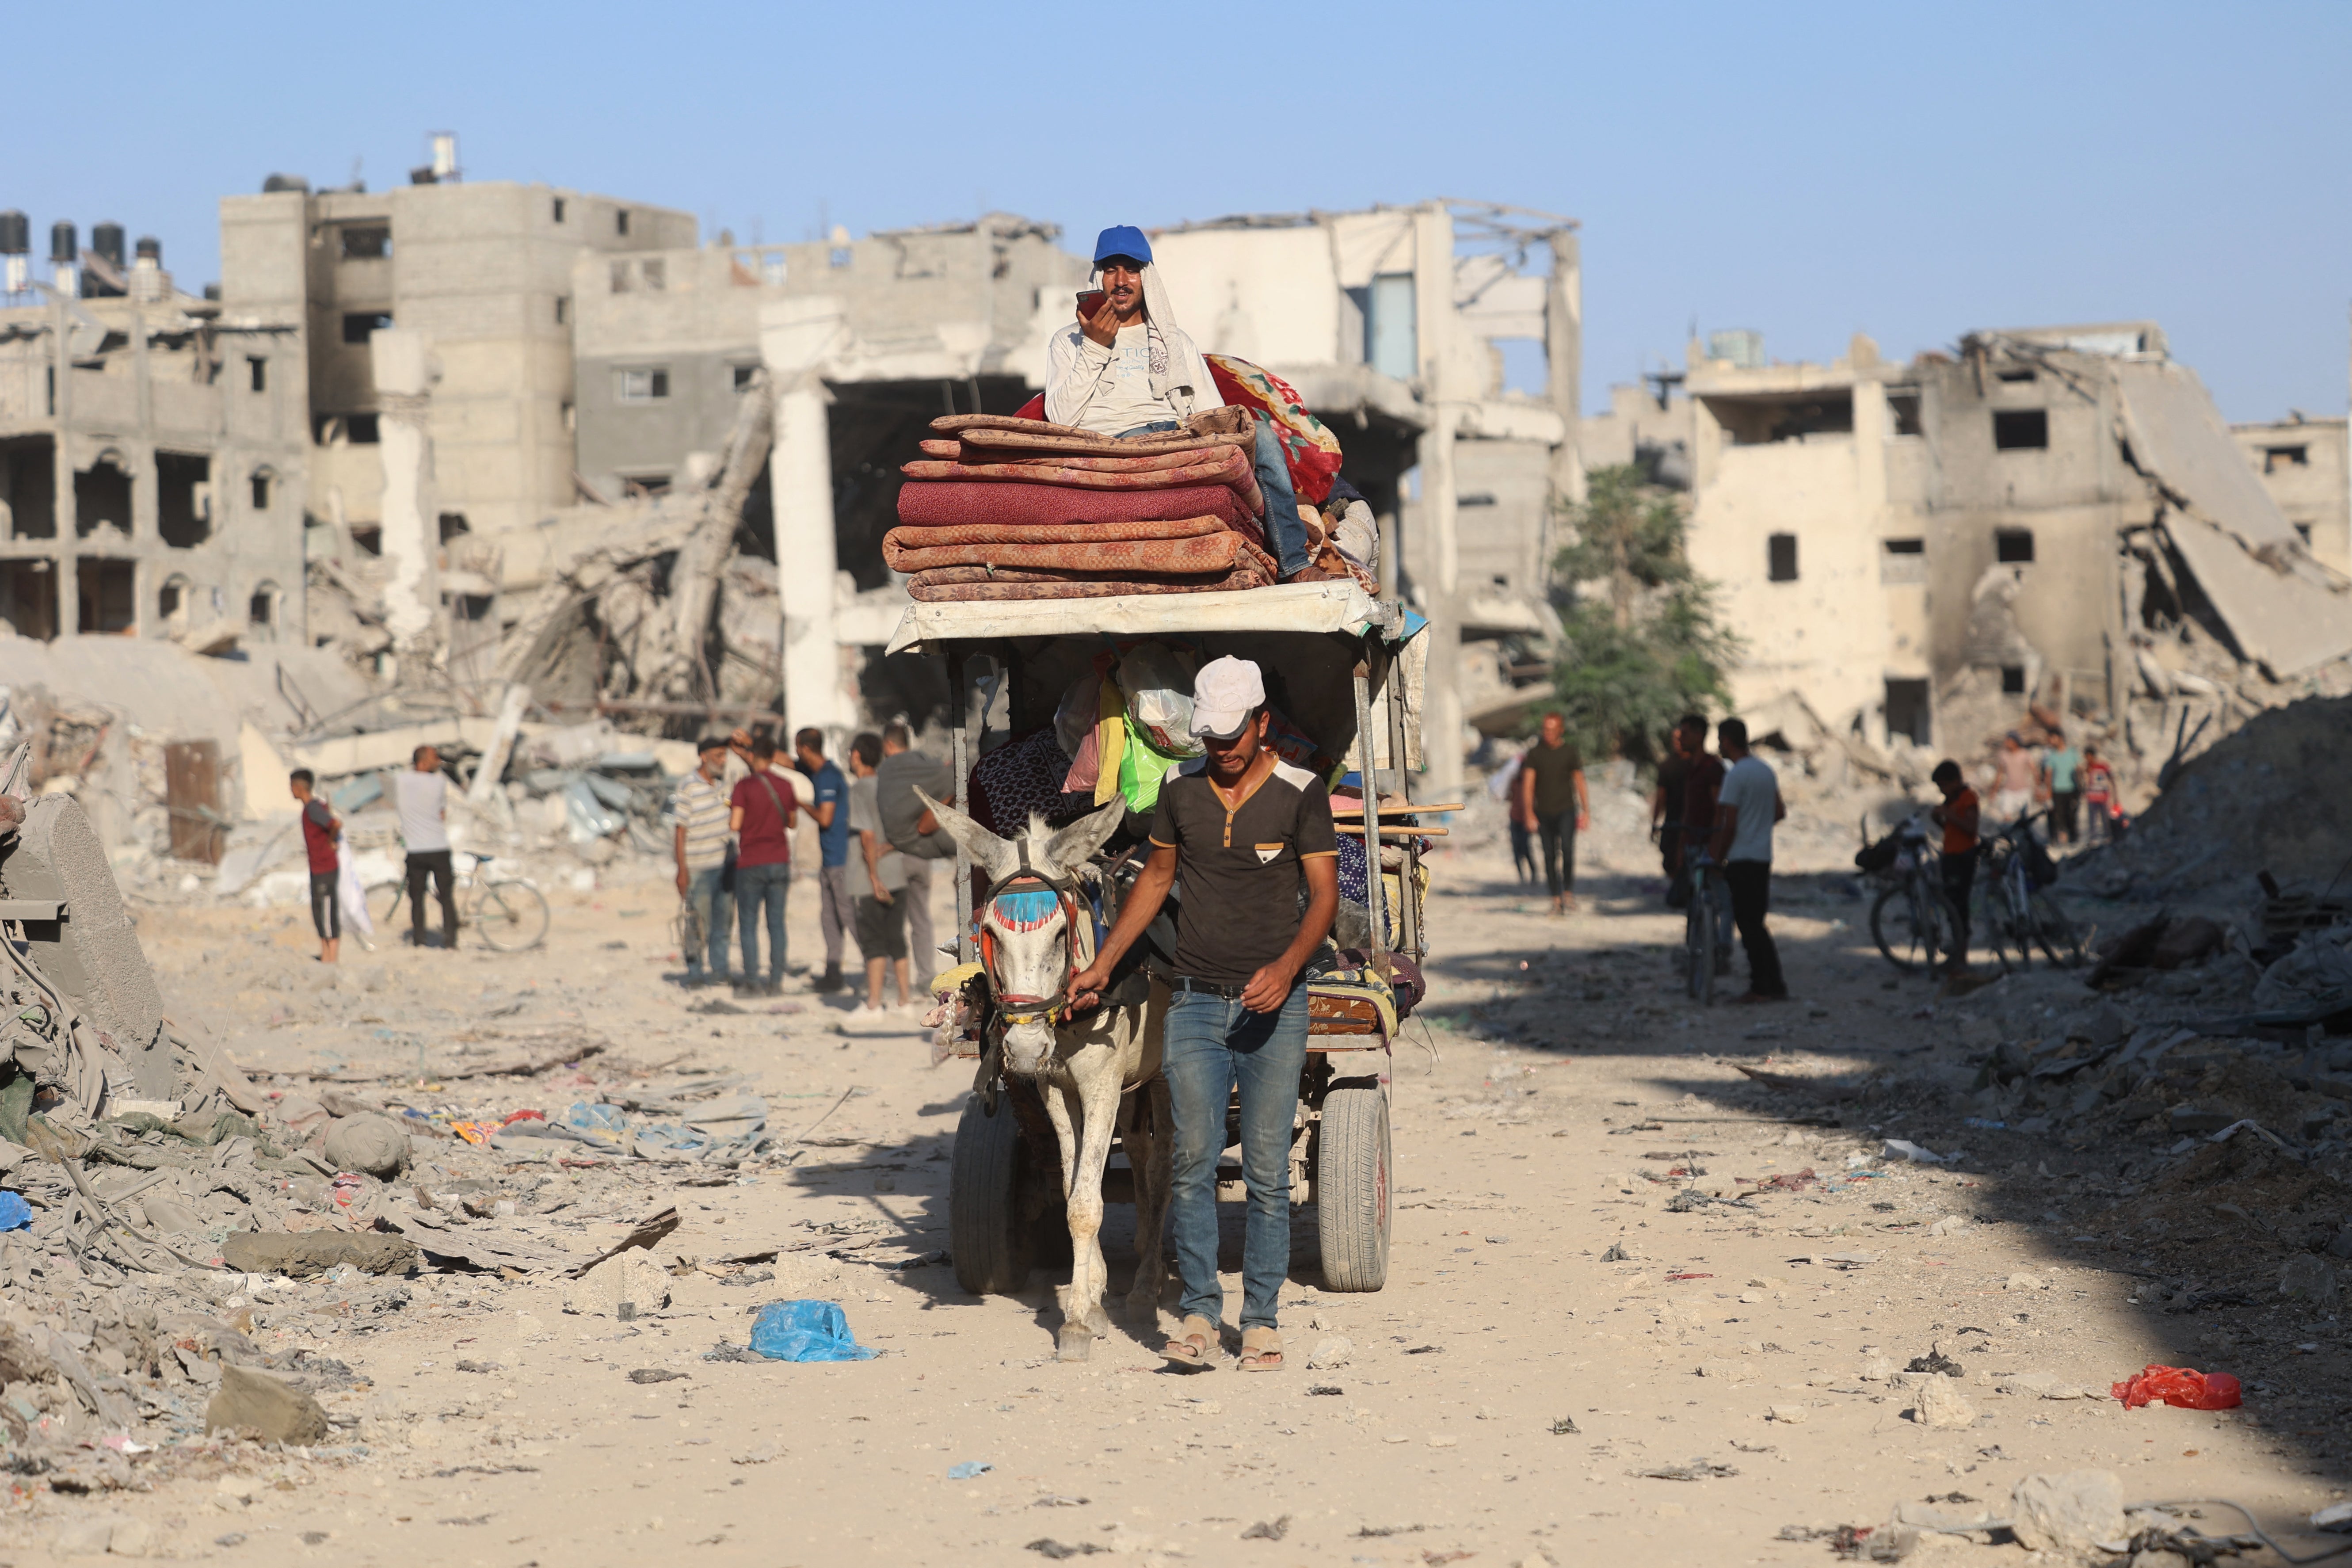 A Palestinian man leads a donkey cart past the destroyed buildings and rubble after the Israeli military withdrew from the Shujaiya neighbourhood, east of Gaza City